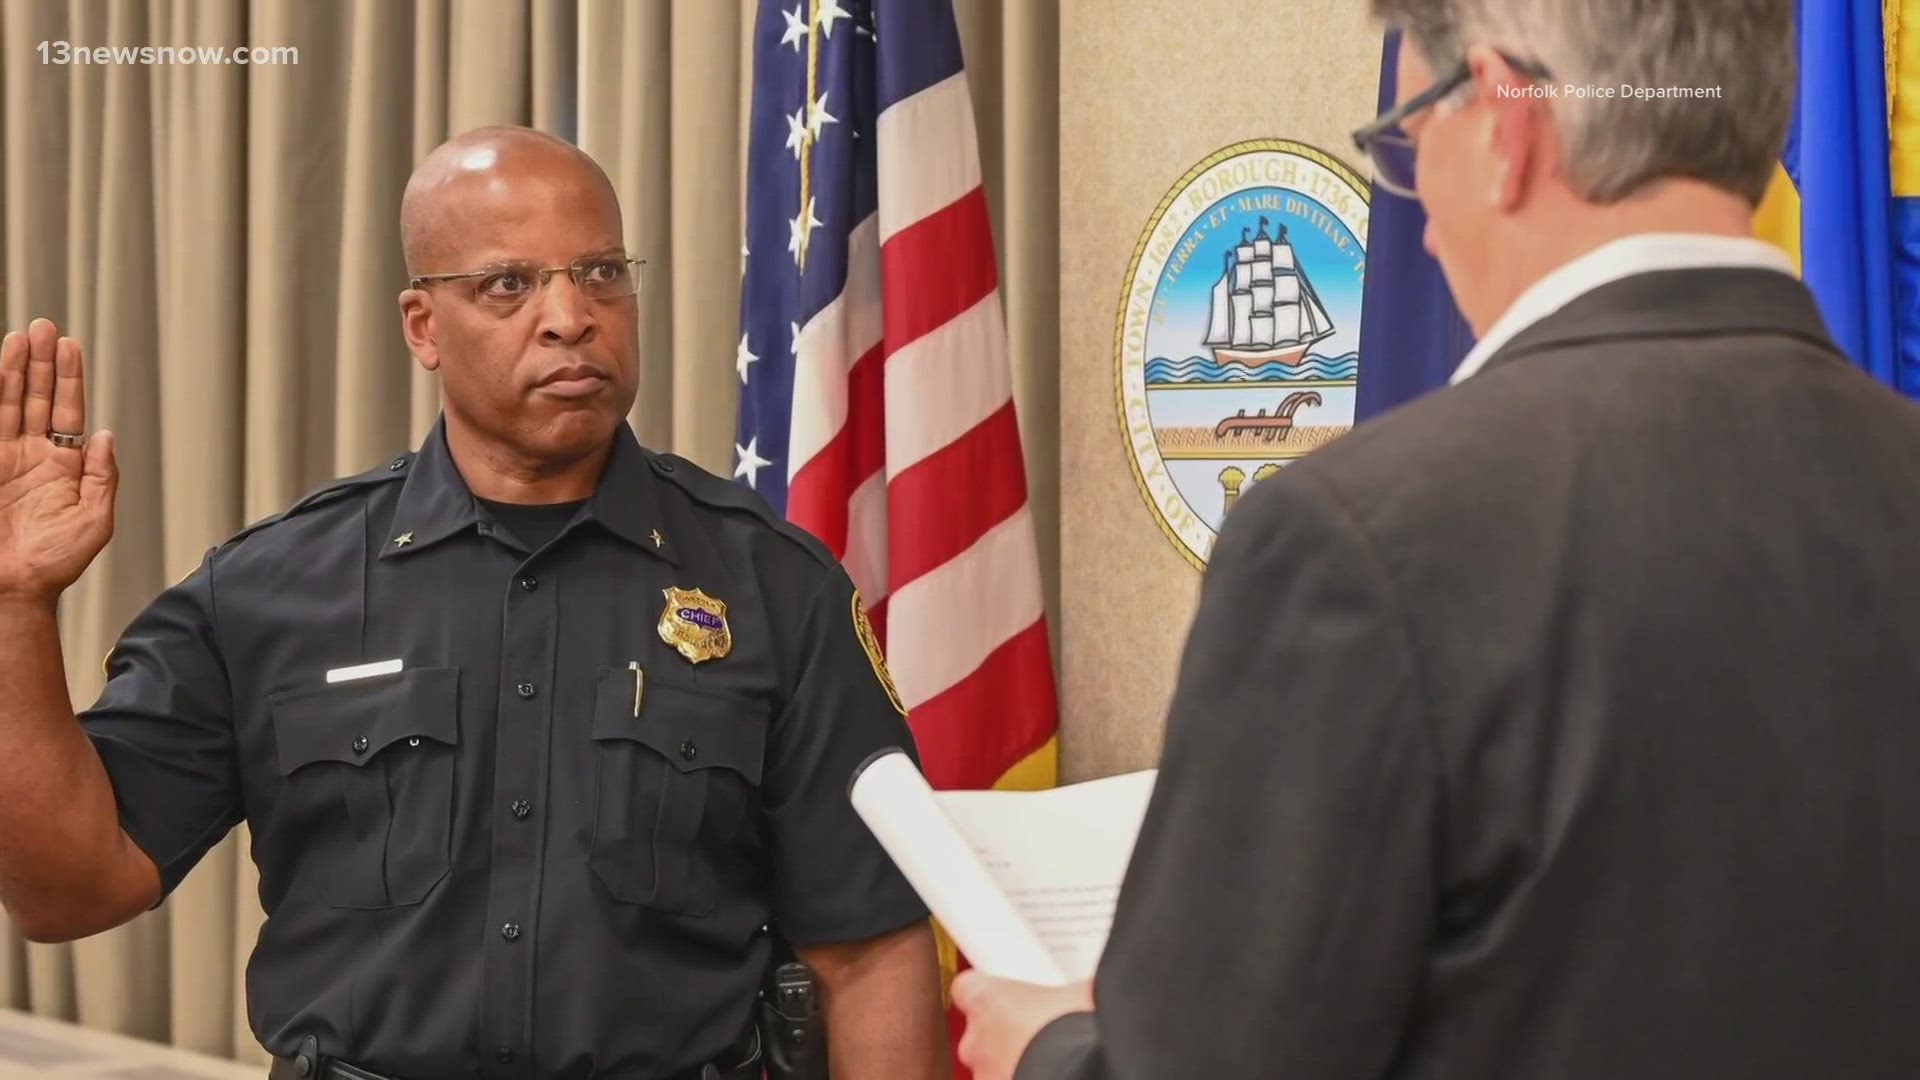 Norfolk Police Chief Mark Talbot got a big pay raise this week when he jumped from the Hampton Police Division to the Norfolk Police Department.